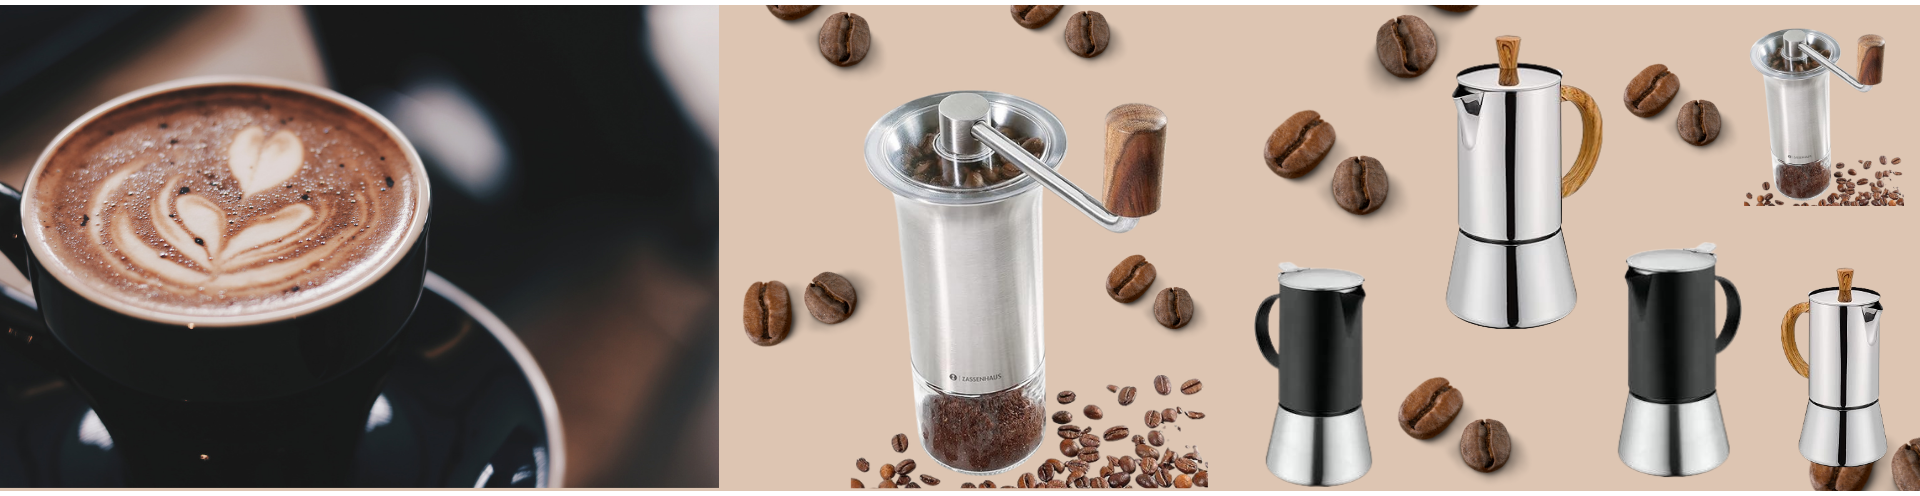 Coffee makers and grinders